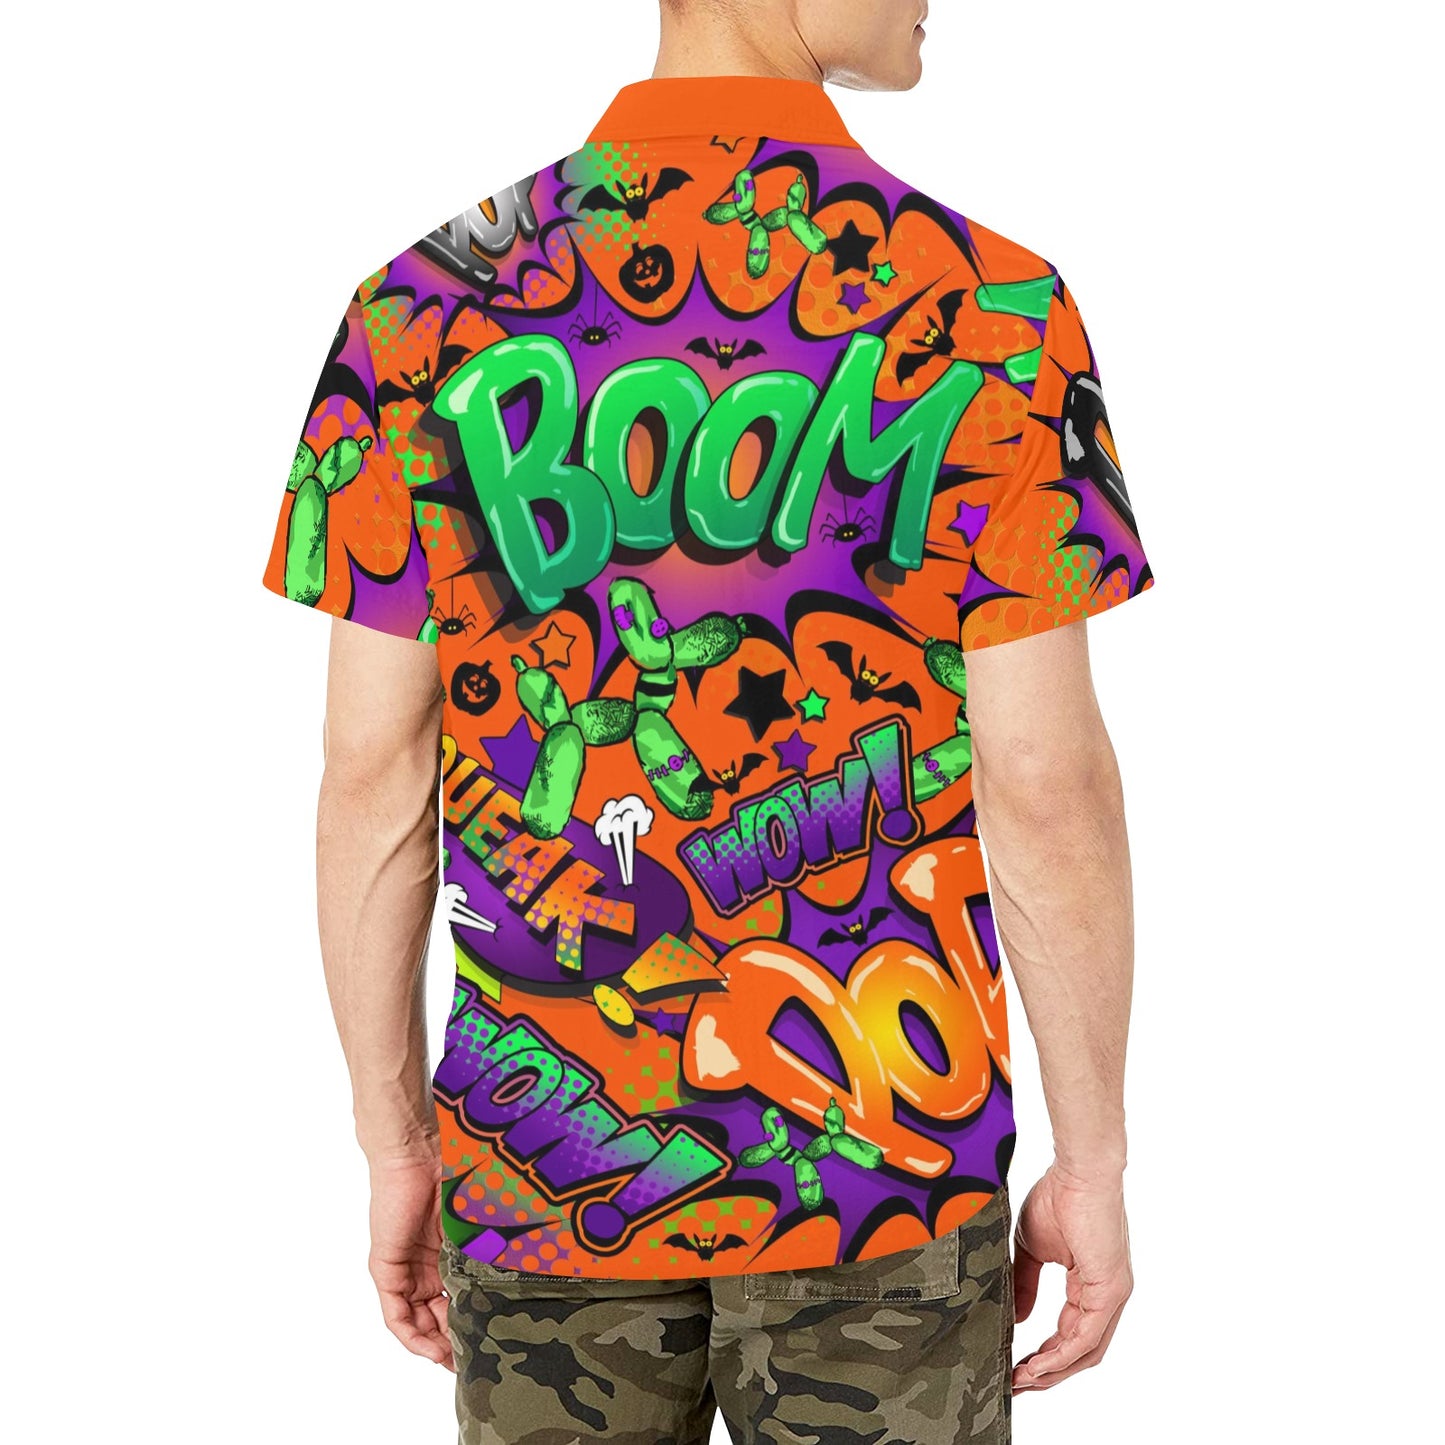 Halloween shirt with zombie balloon dogs for balloon artists